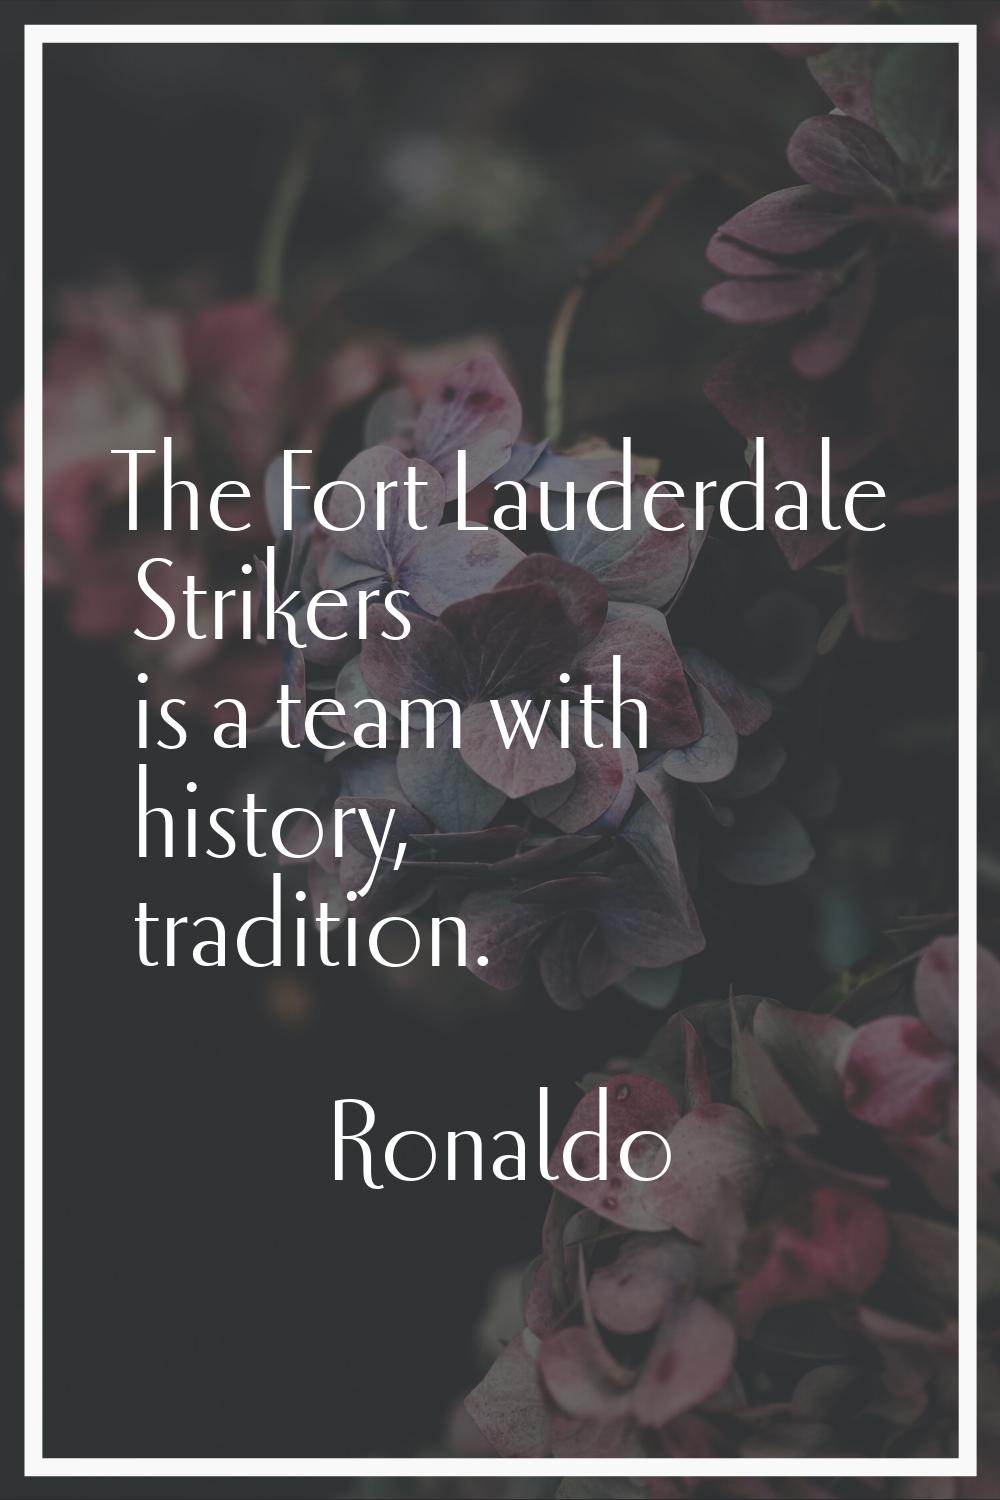 The Fort Lauderdale Strikers is a team with history, tradition.